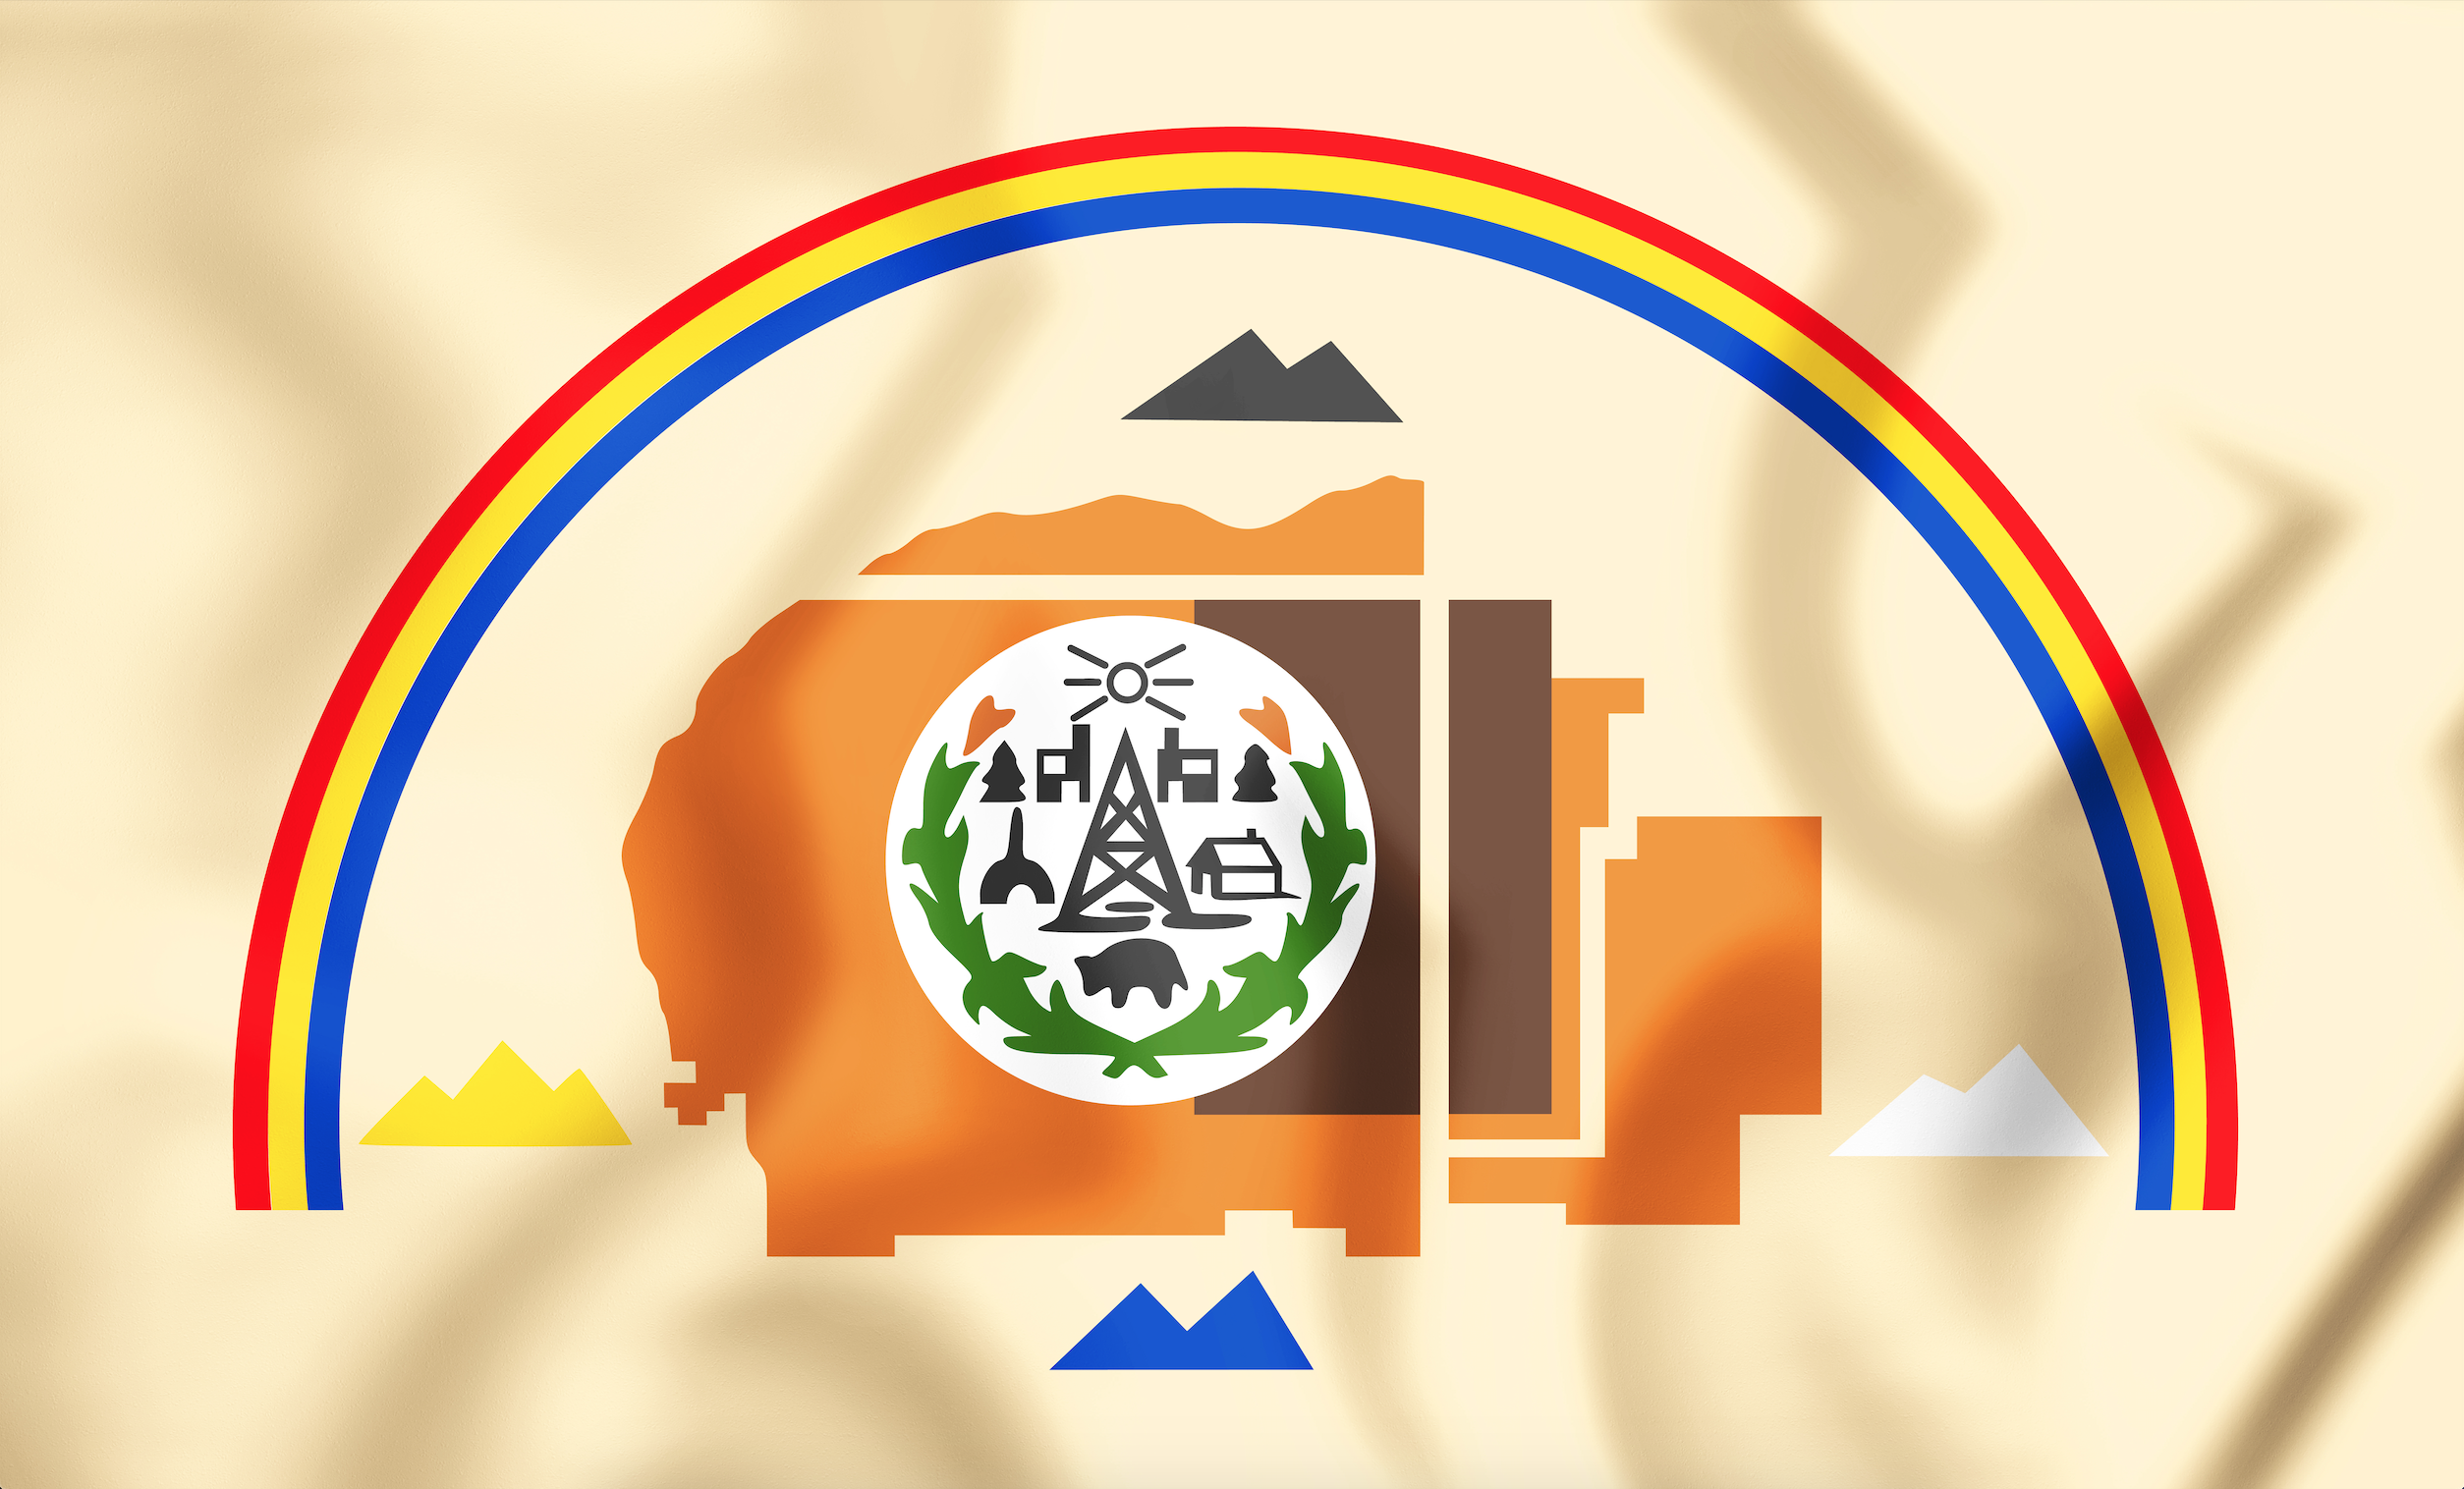 navajo symbols and meanings